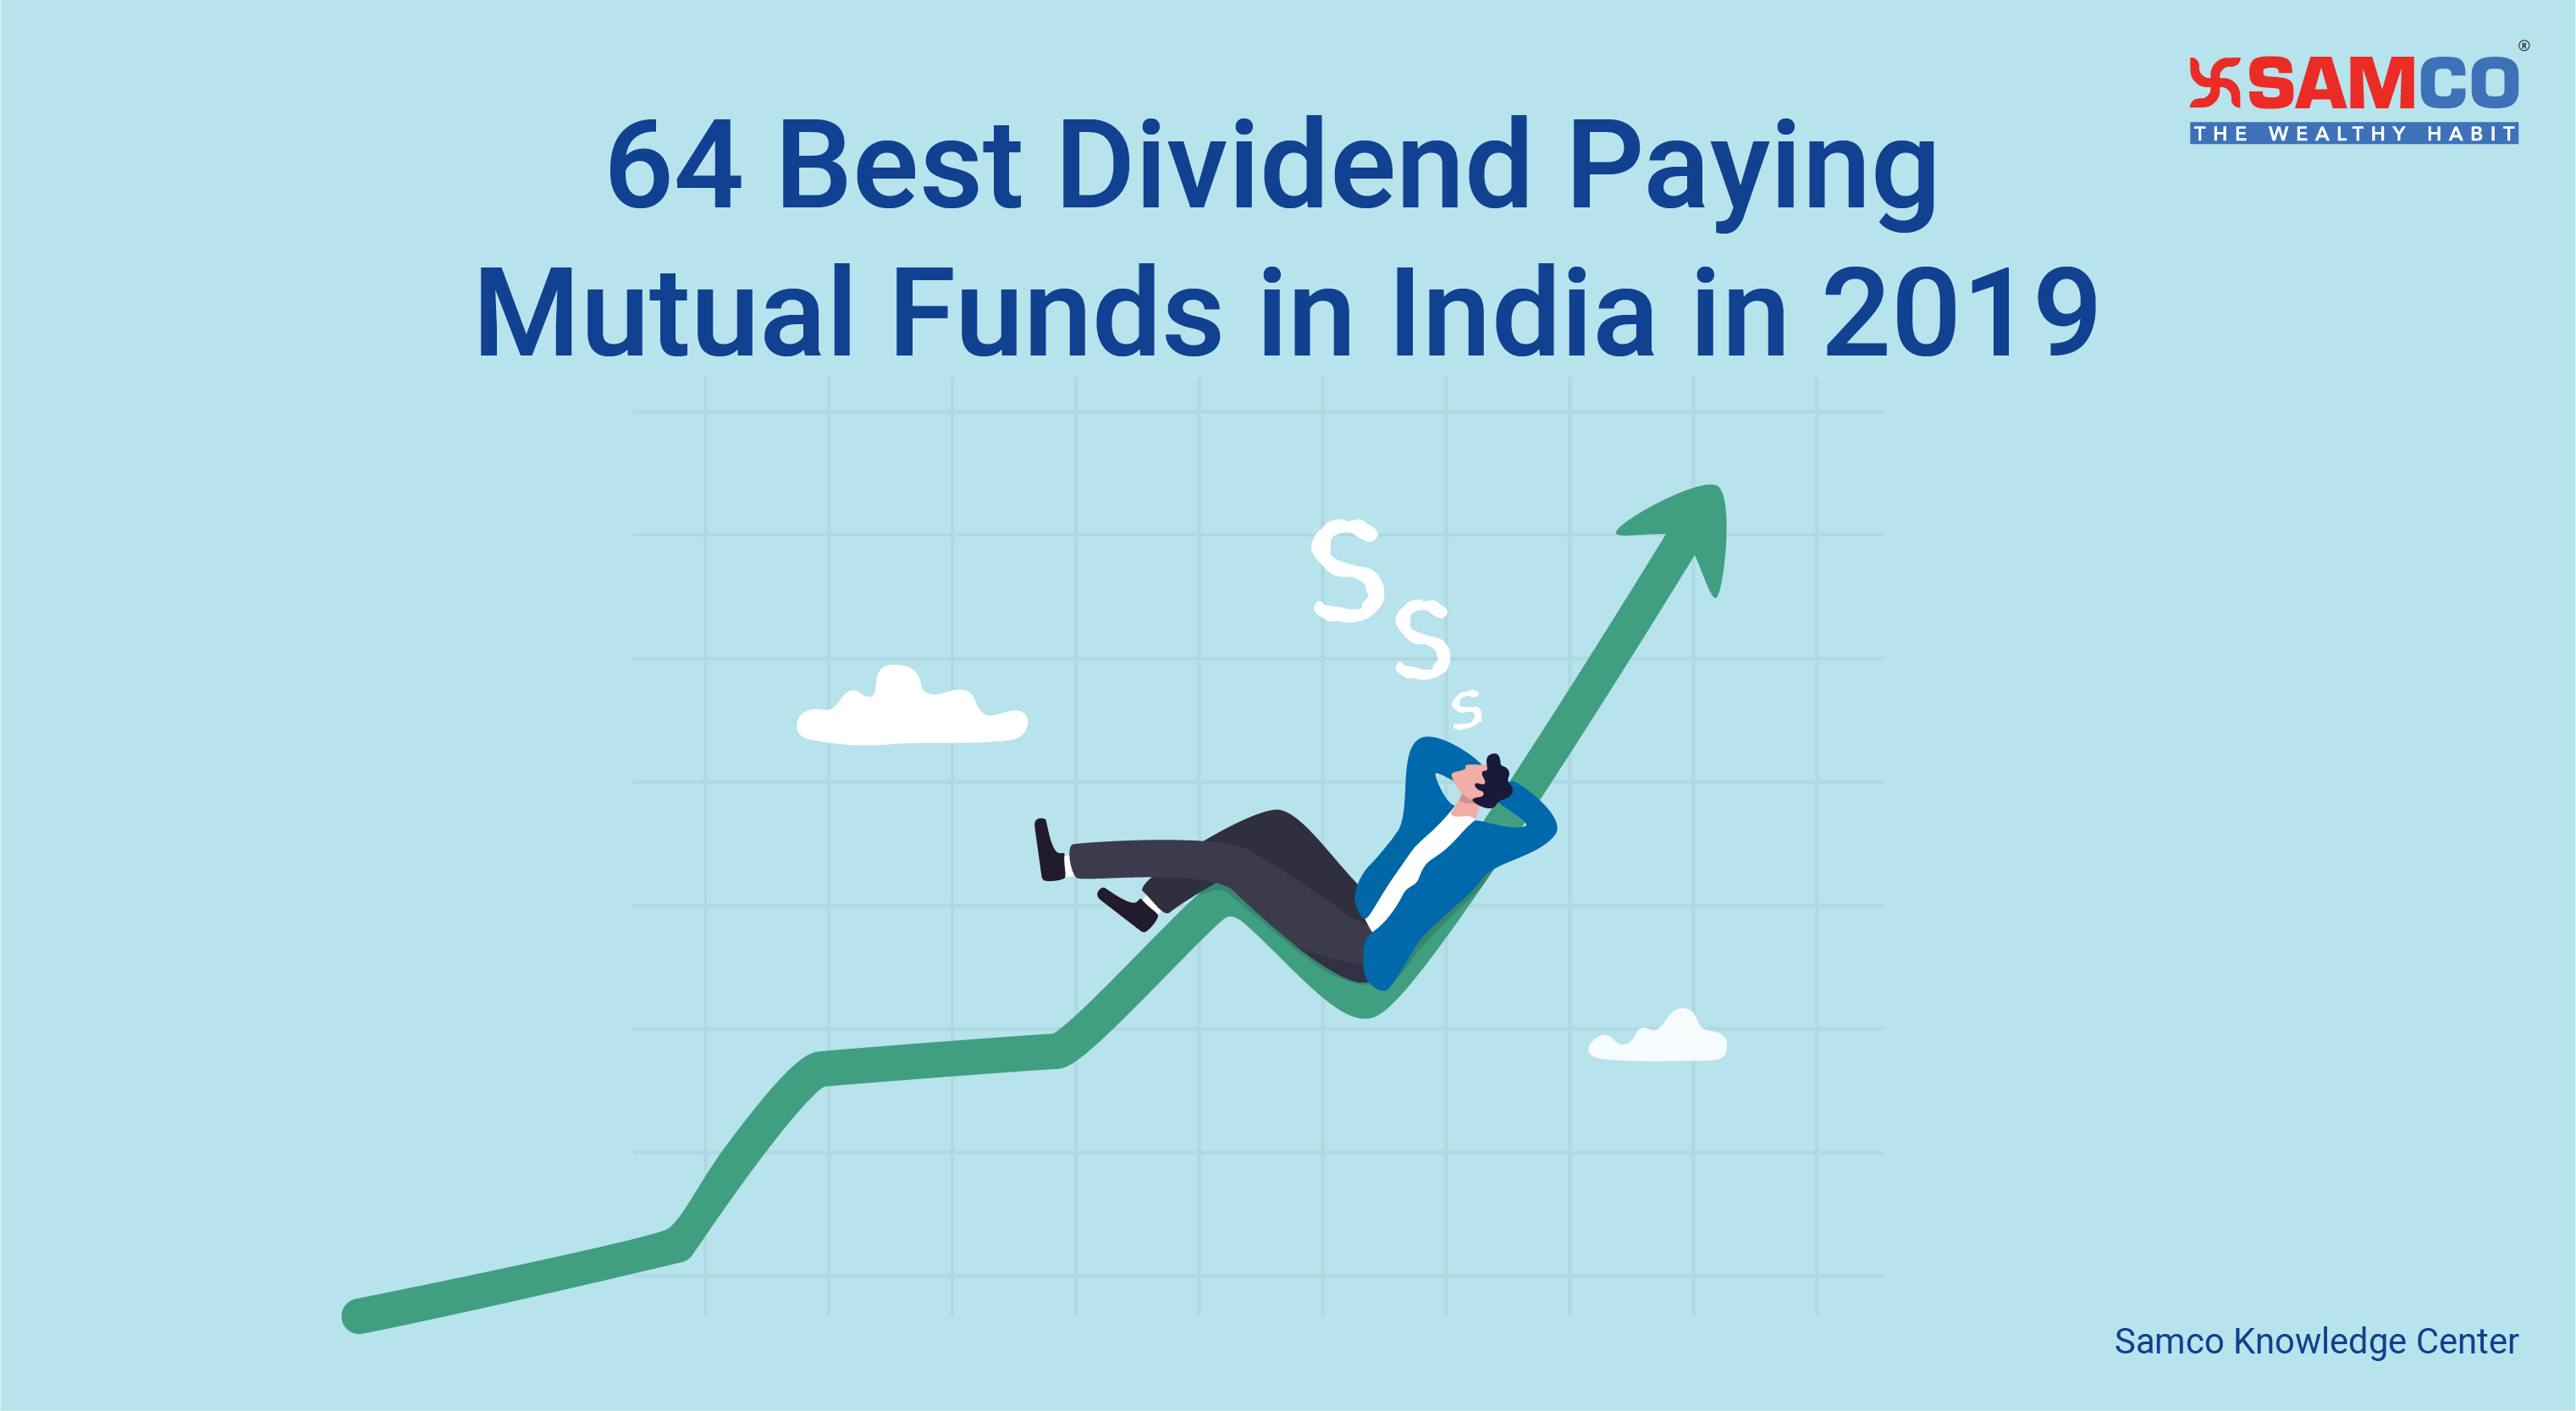 64 Best Dividend Paying Mutual Funds in India in 2019